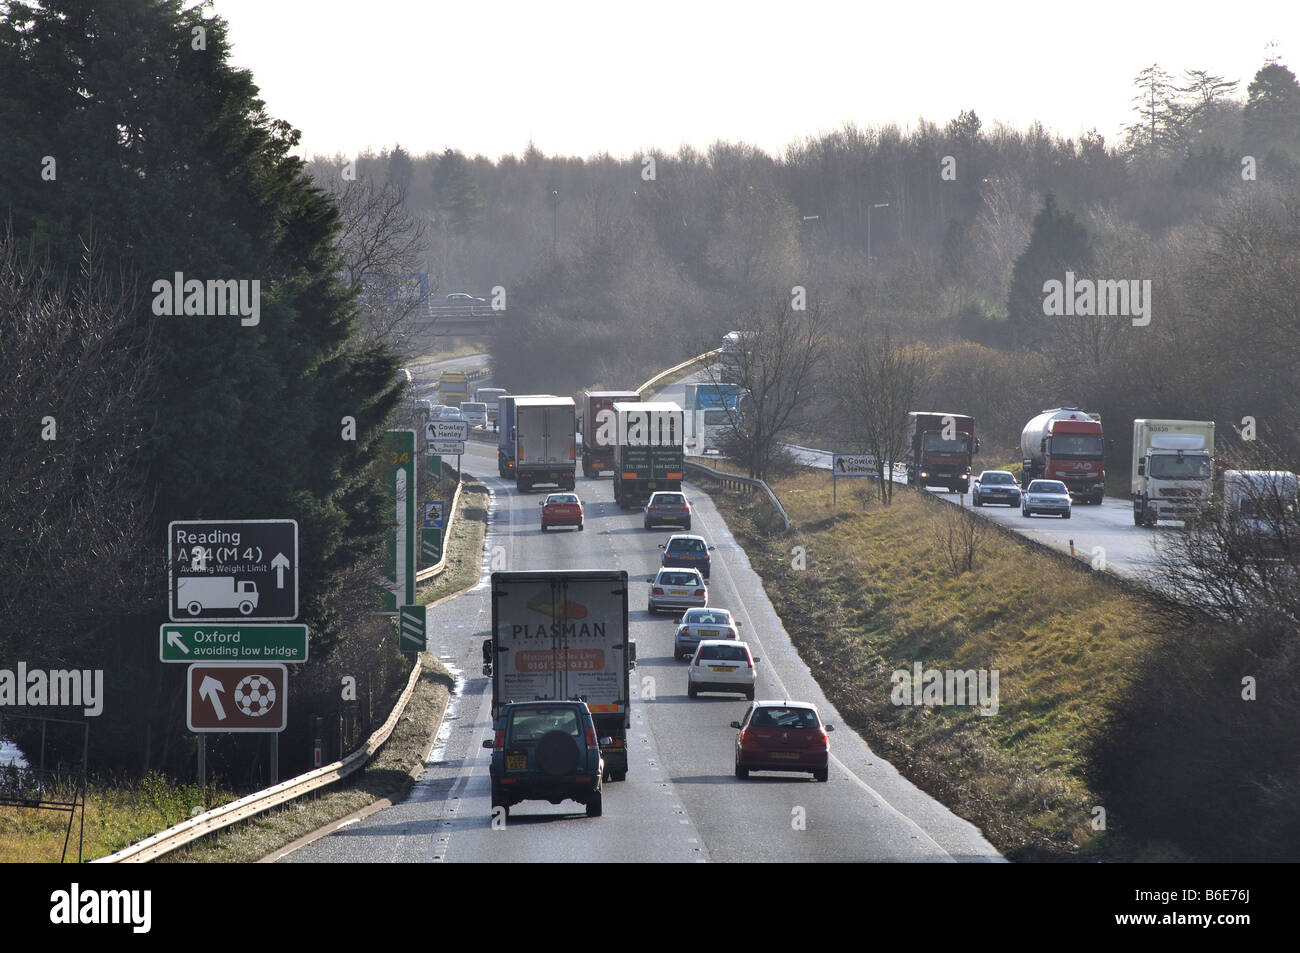 A34 Road in South Hinksey, Oxford, England, UK Stockfoto